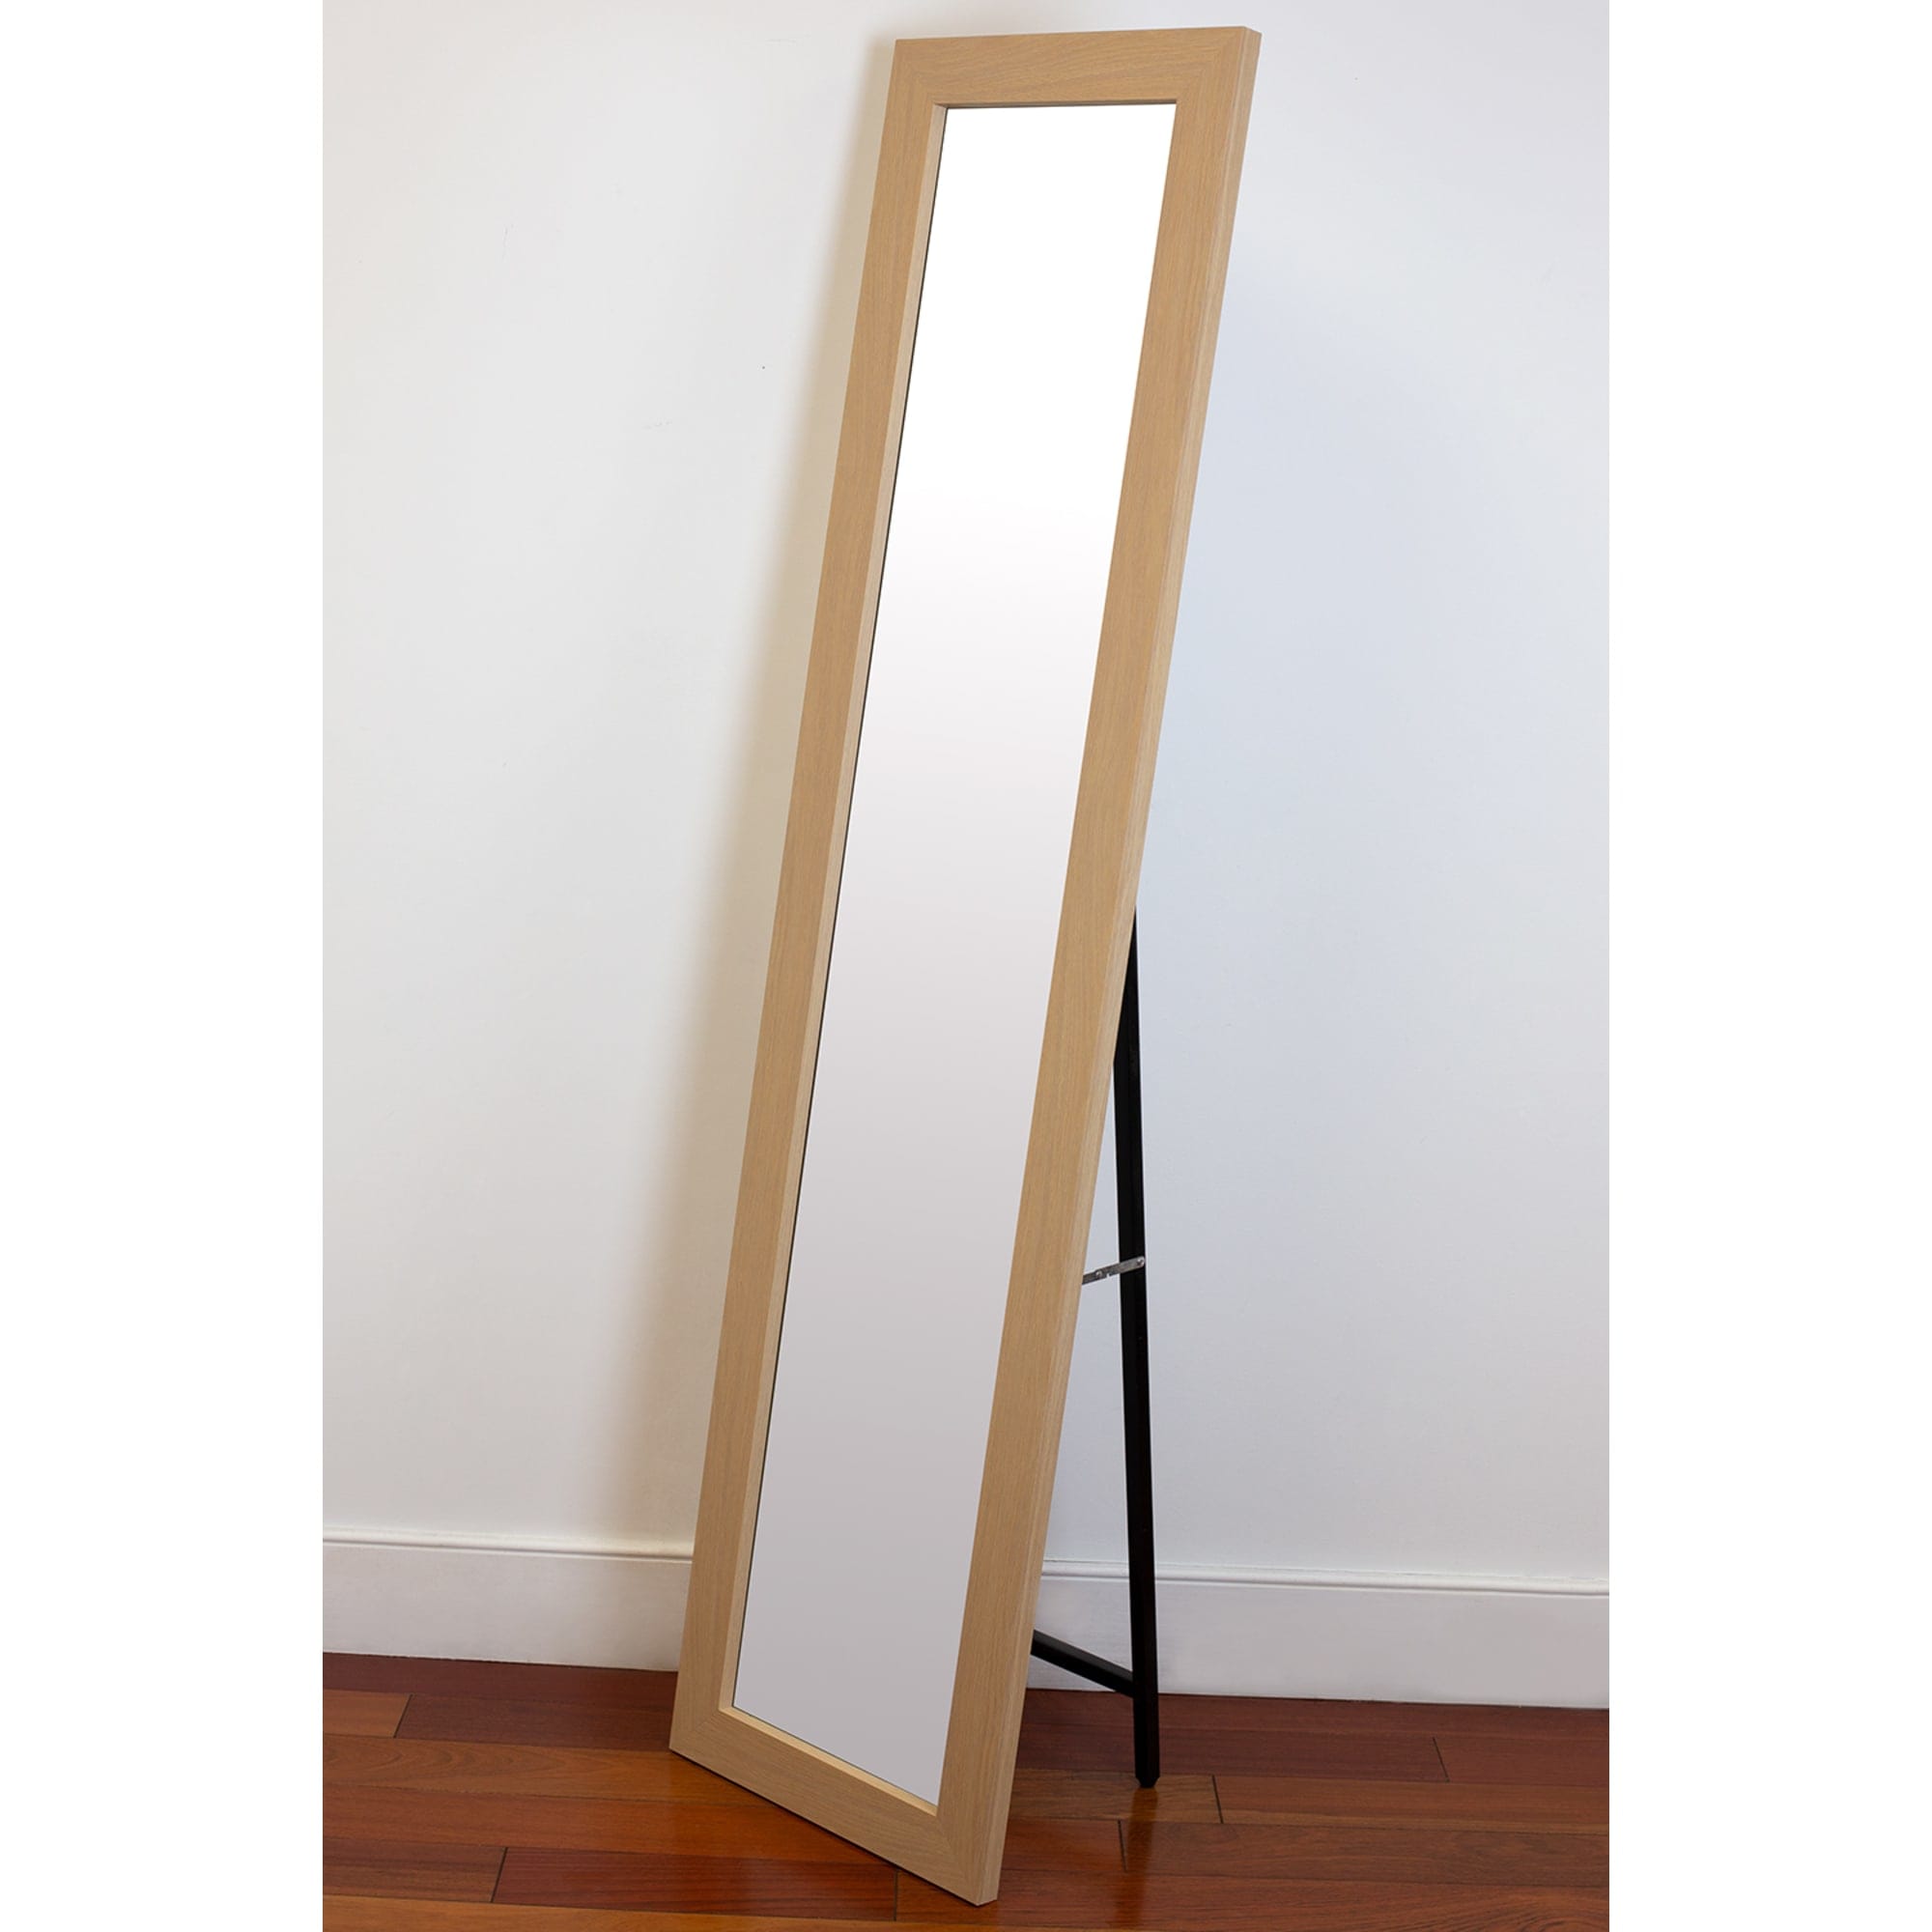 Home Basics Full Length Floor Mirror With Easel Back, Natural $40.00 EACH, CASE PACK OF 4